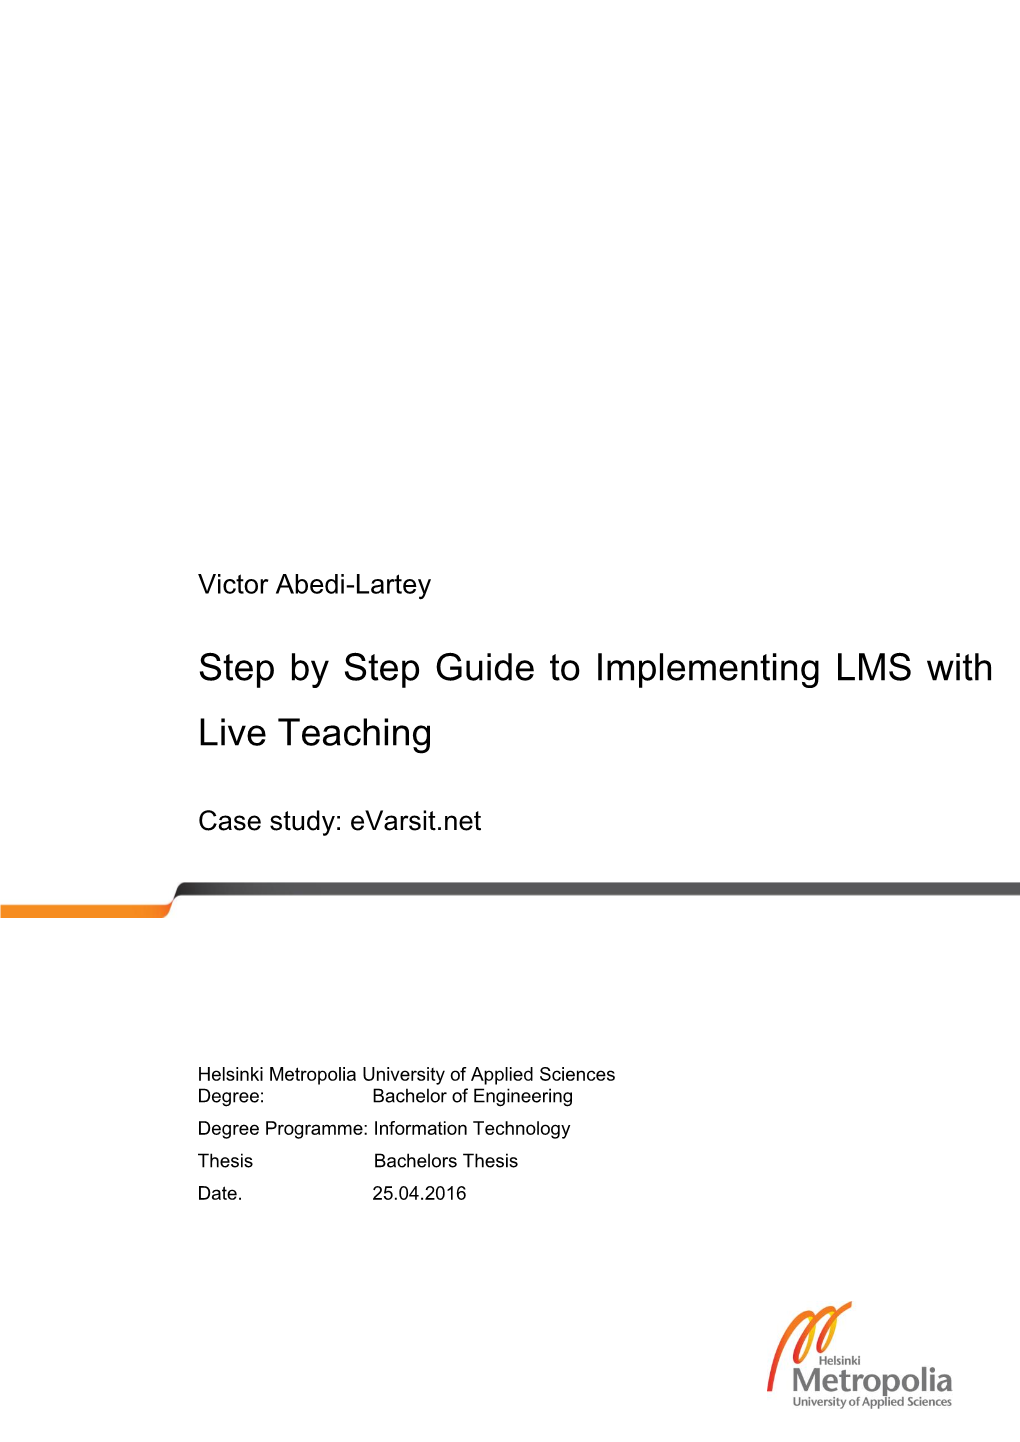 Step by Step Guide to Implementing LMS with Live Teaching